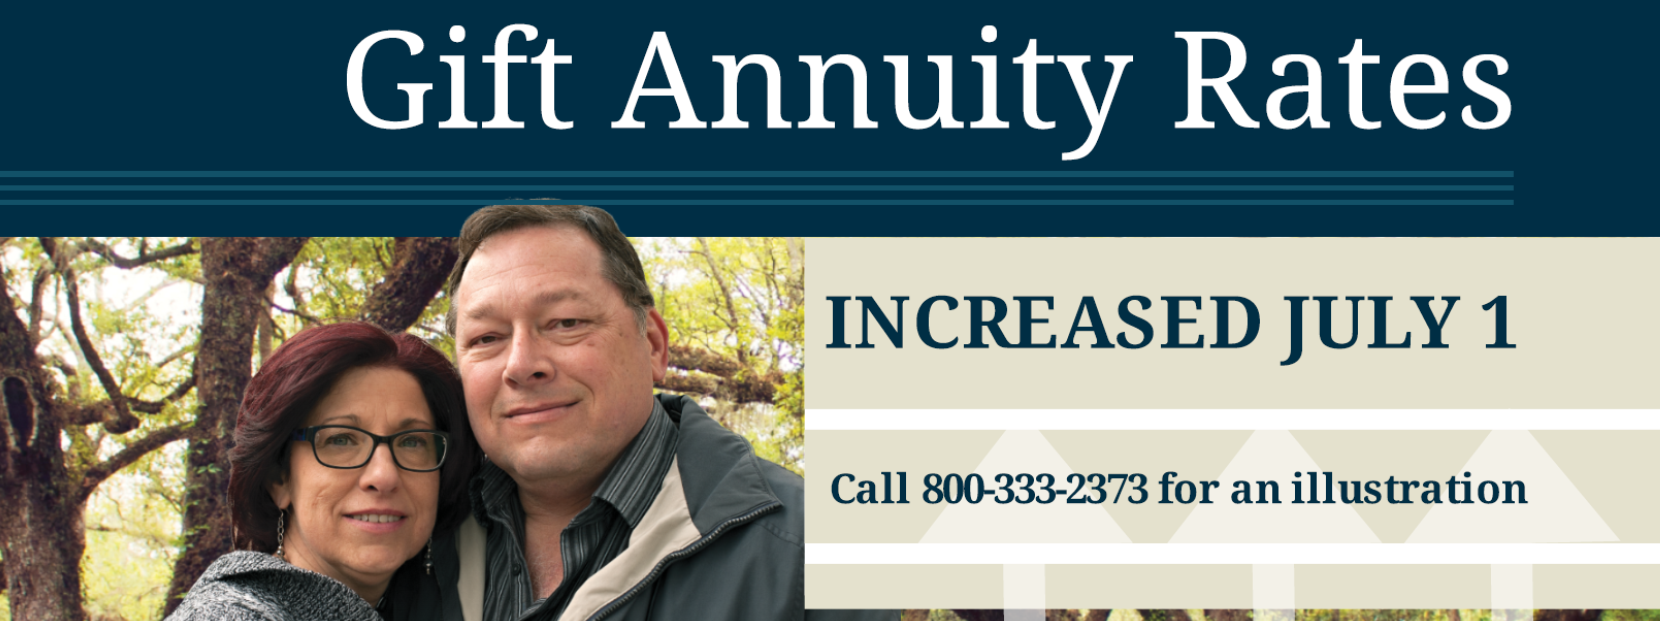 gift annuity rates are going up July 1, call 800-333-2373 for an illustration